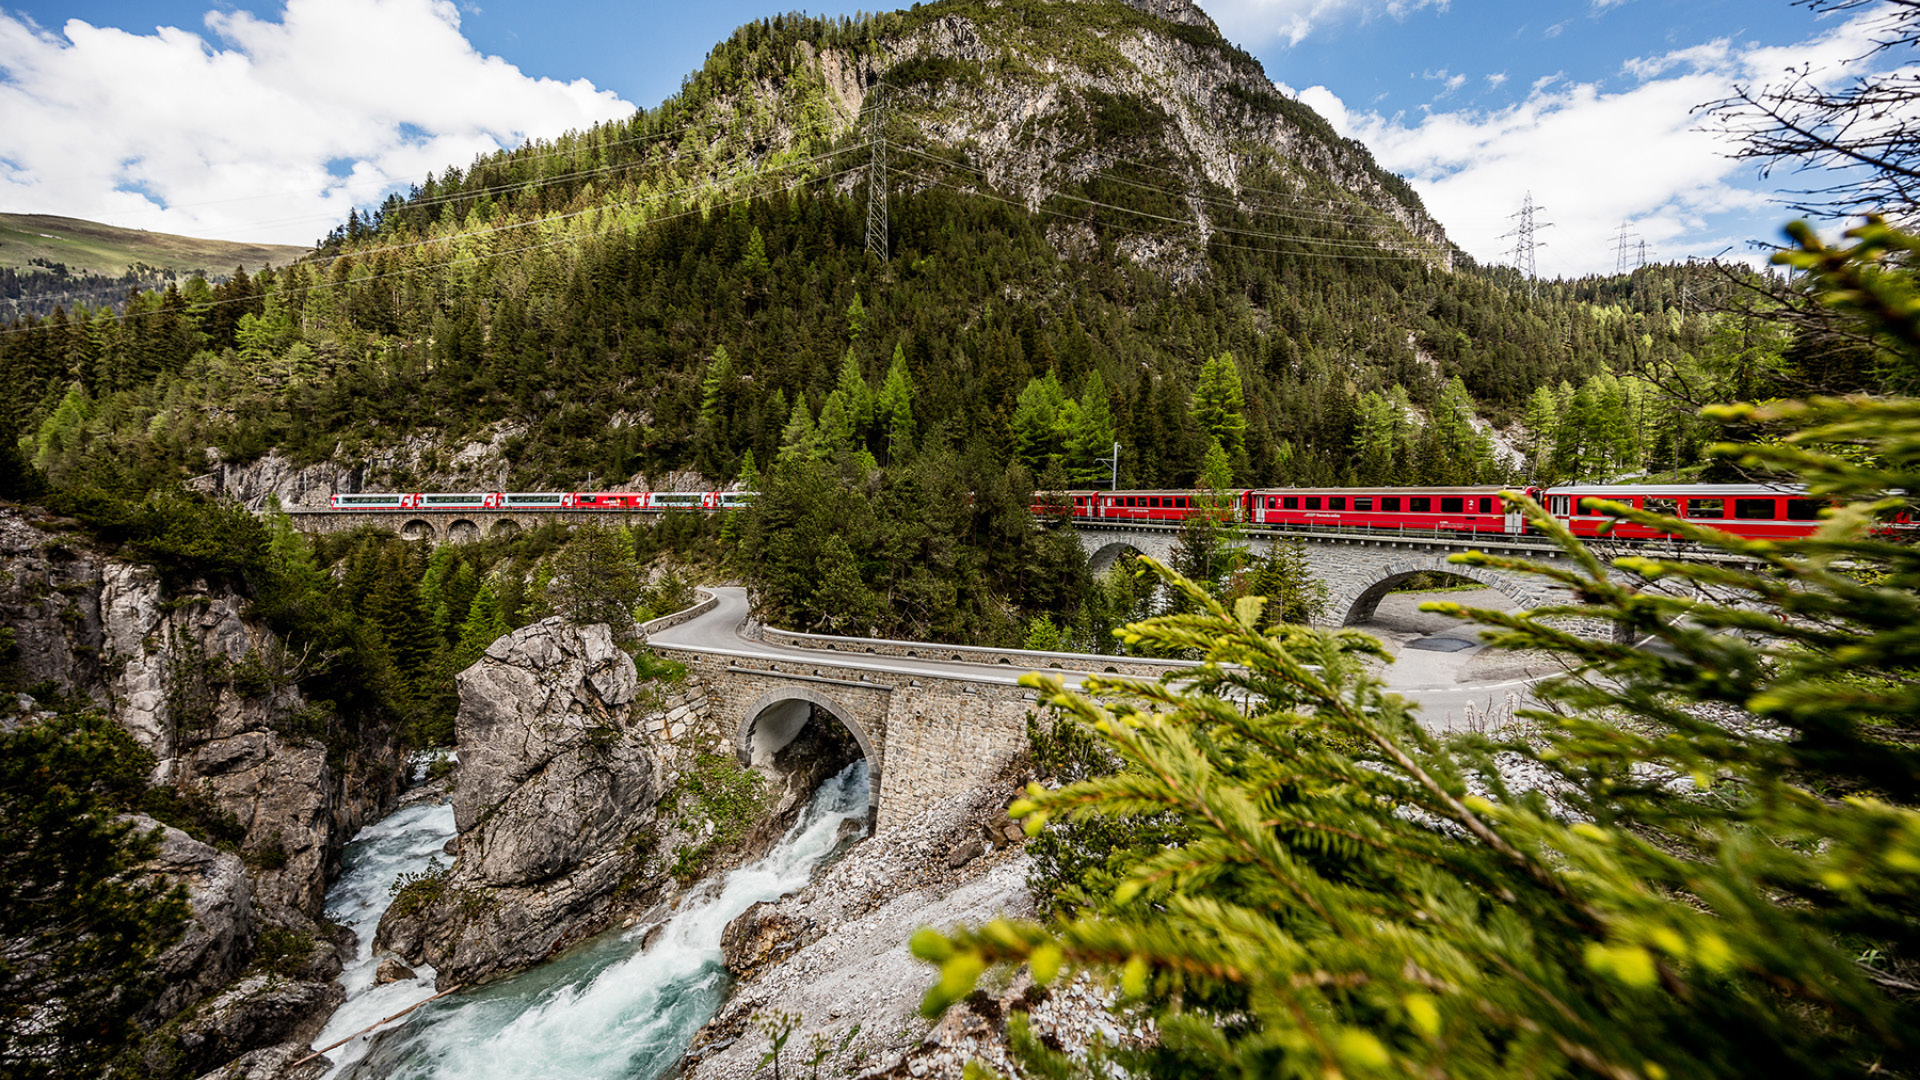 Bucket List Material Experience A Rail Journey In Switzerland On The G